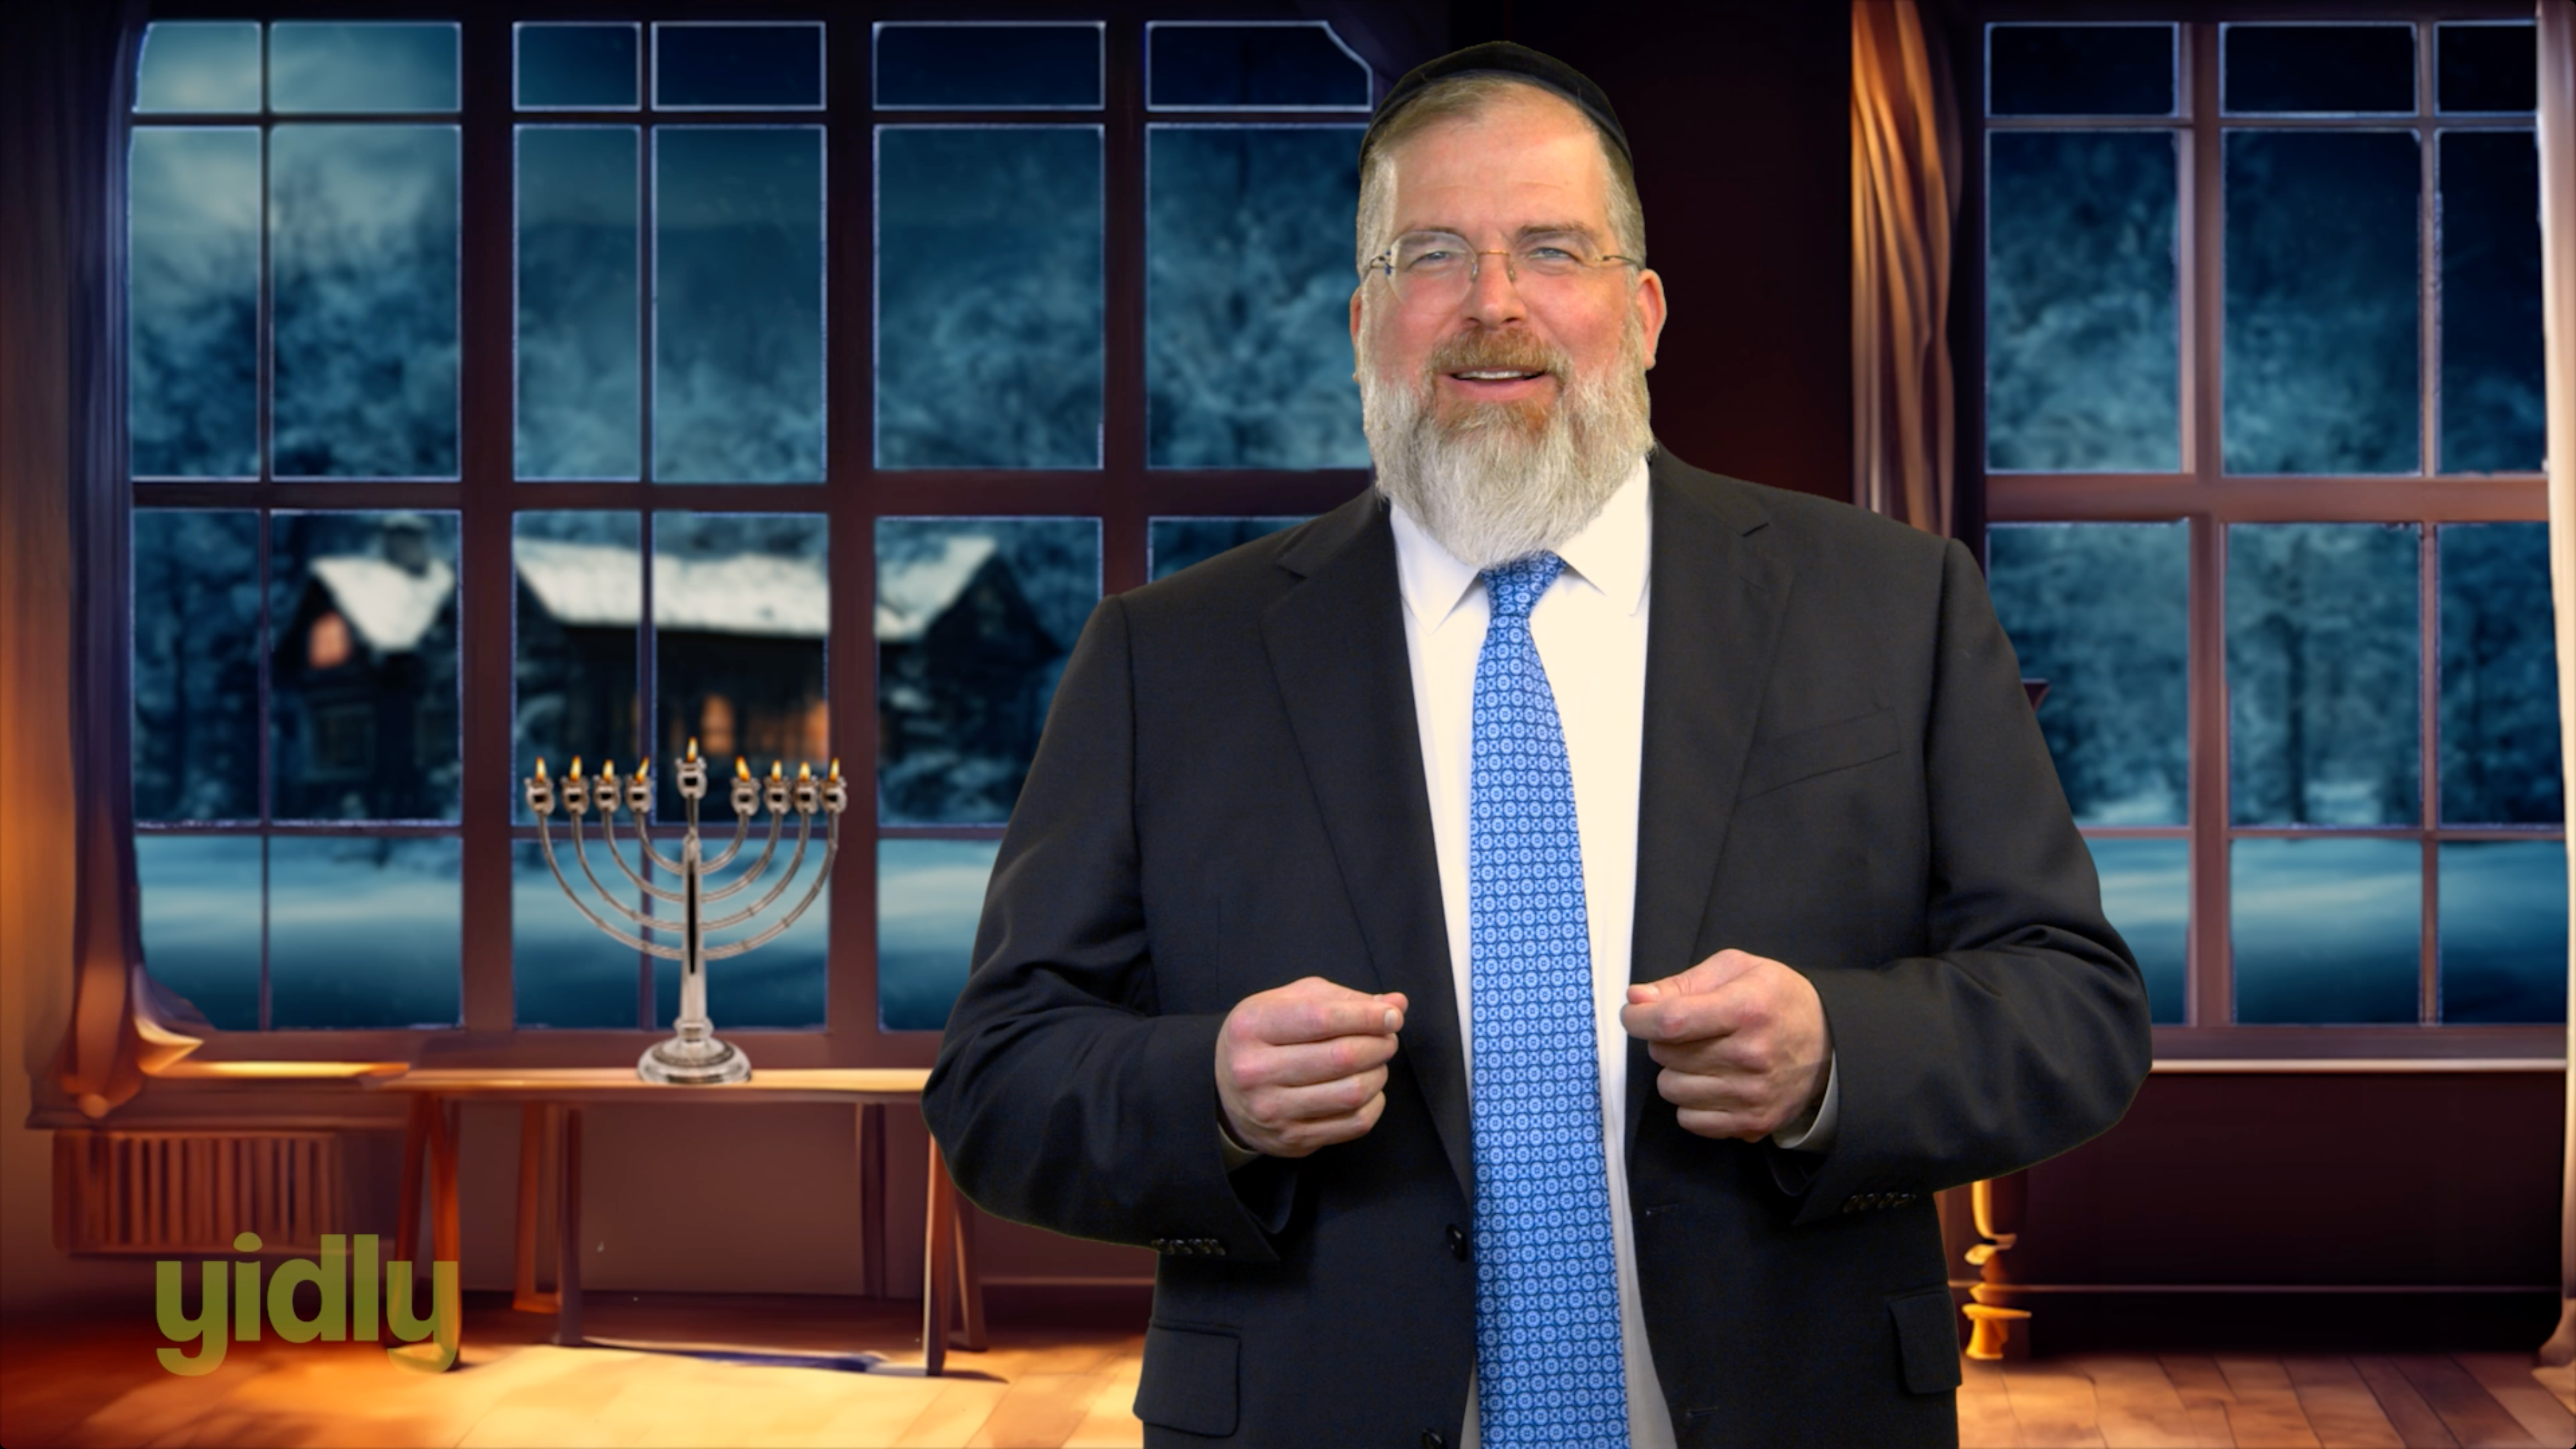 Yidly - The Chanukah Program (Interactive Video)